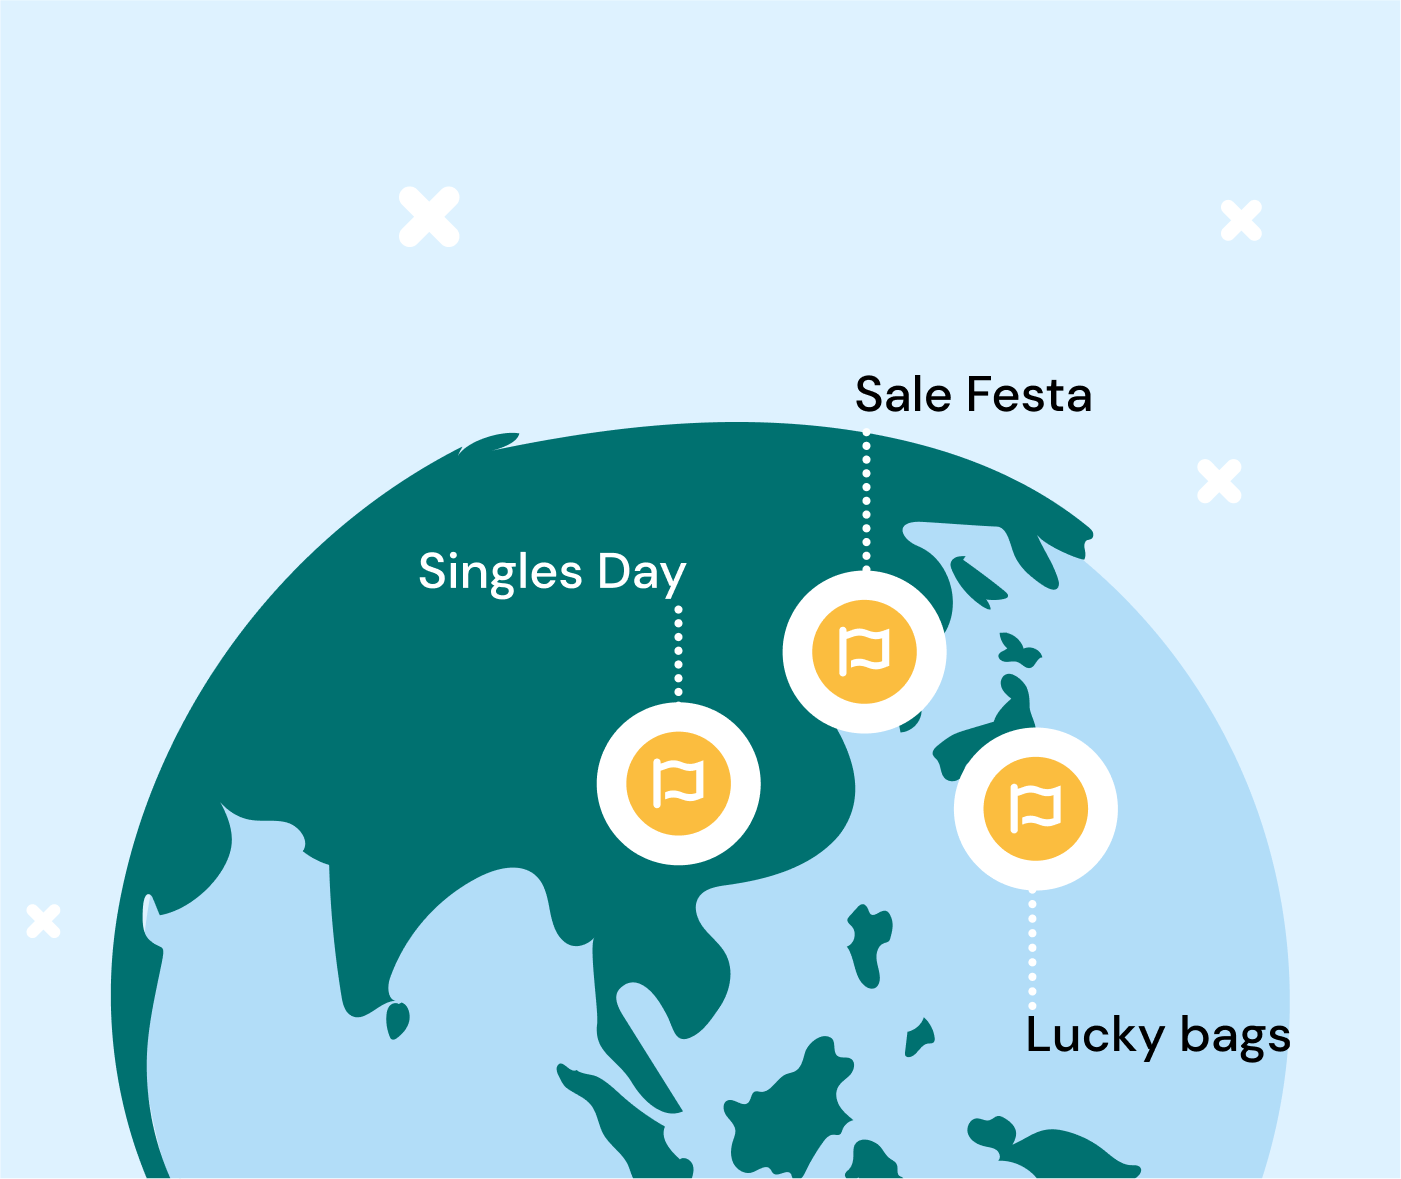 Globe mapping out the big shopping holidays in Asia